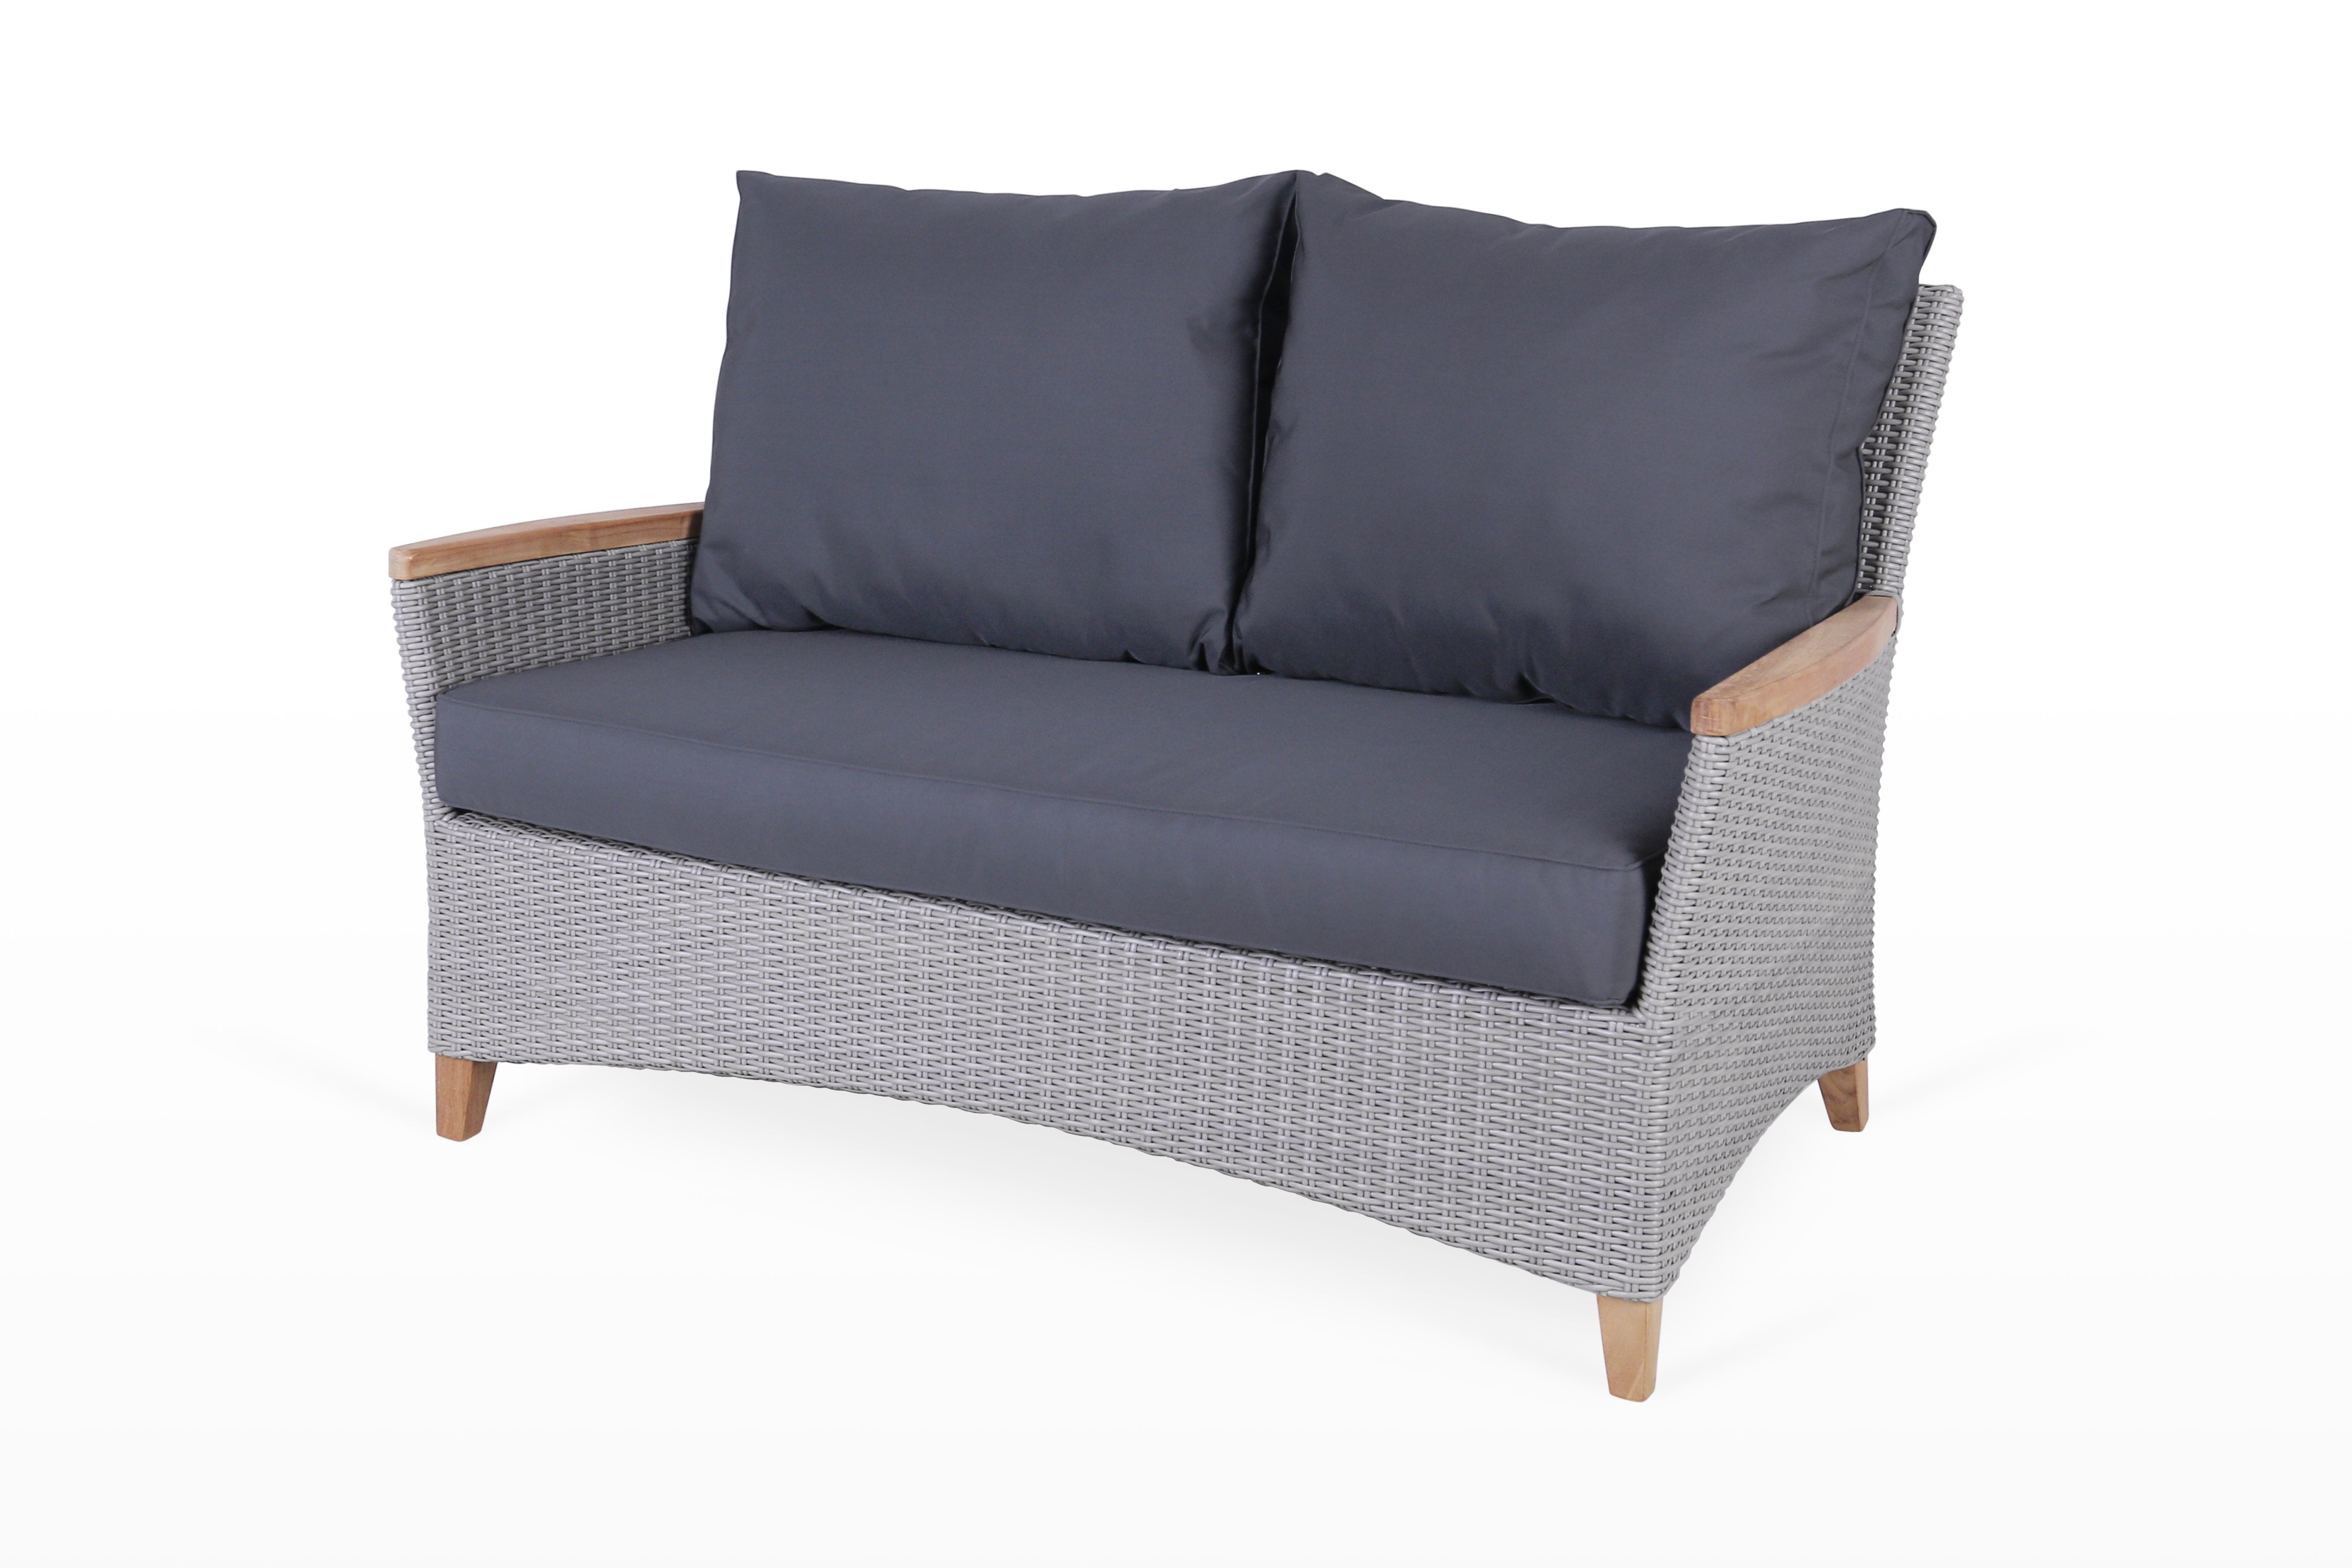 East India Florence 2 seat lounger